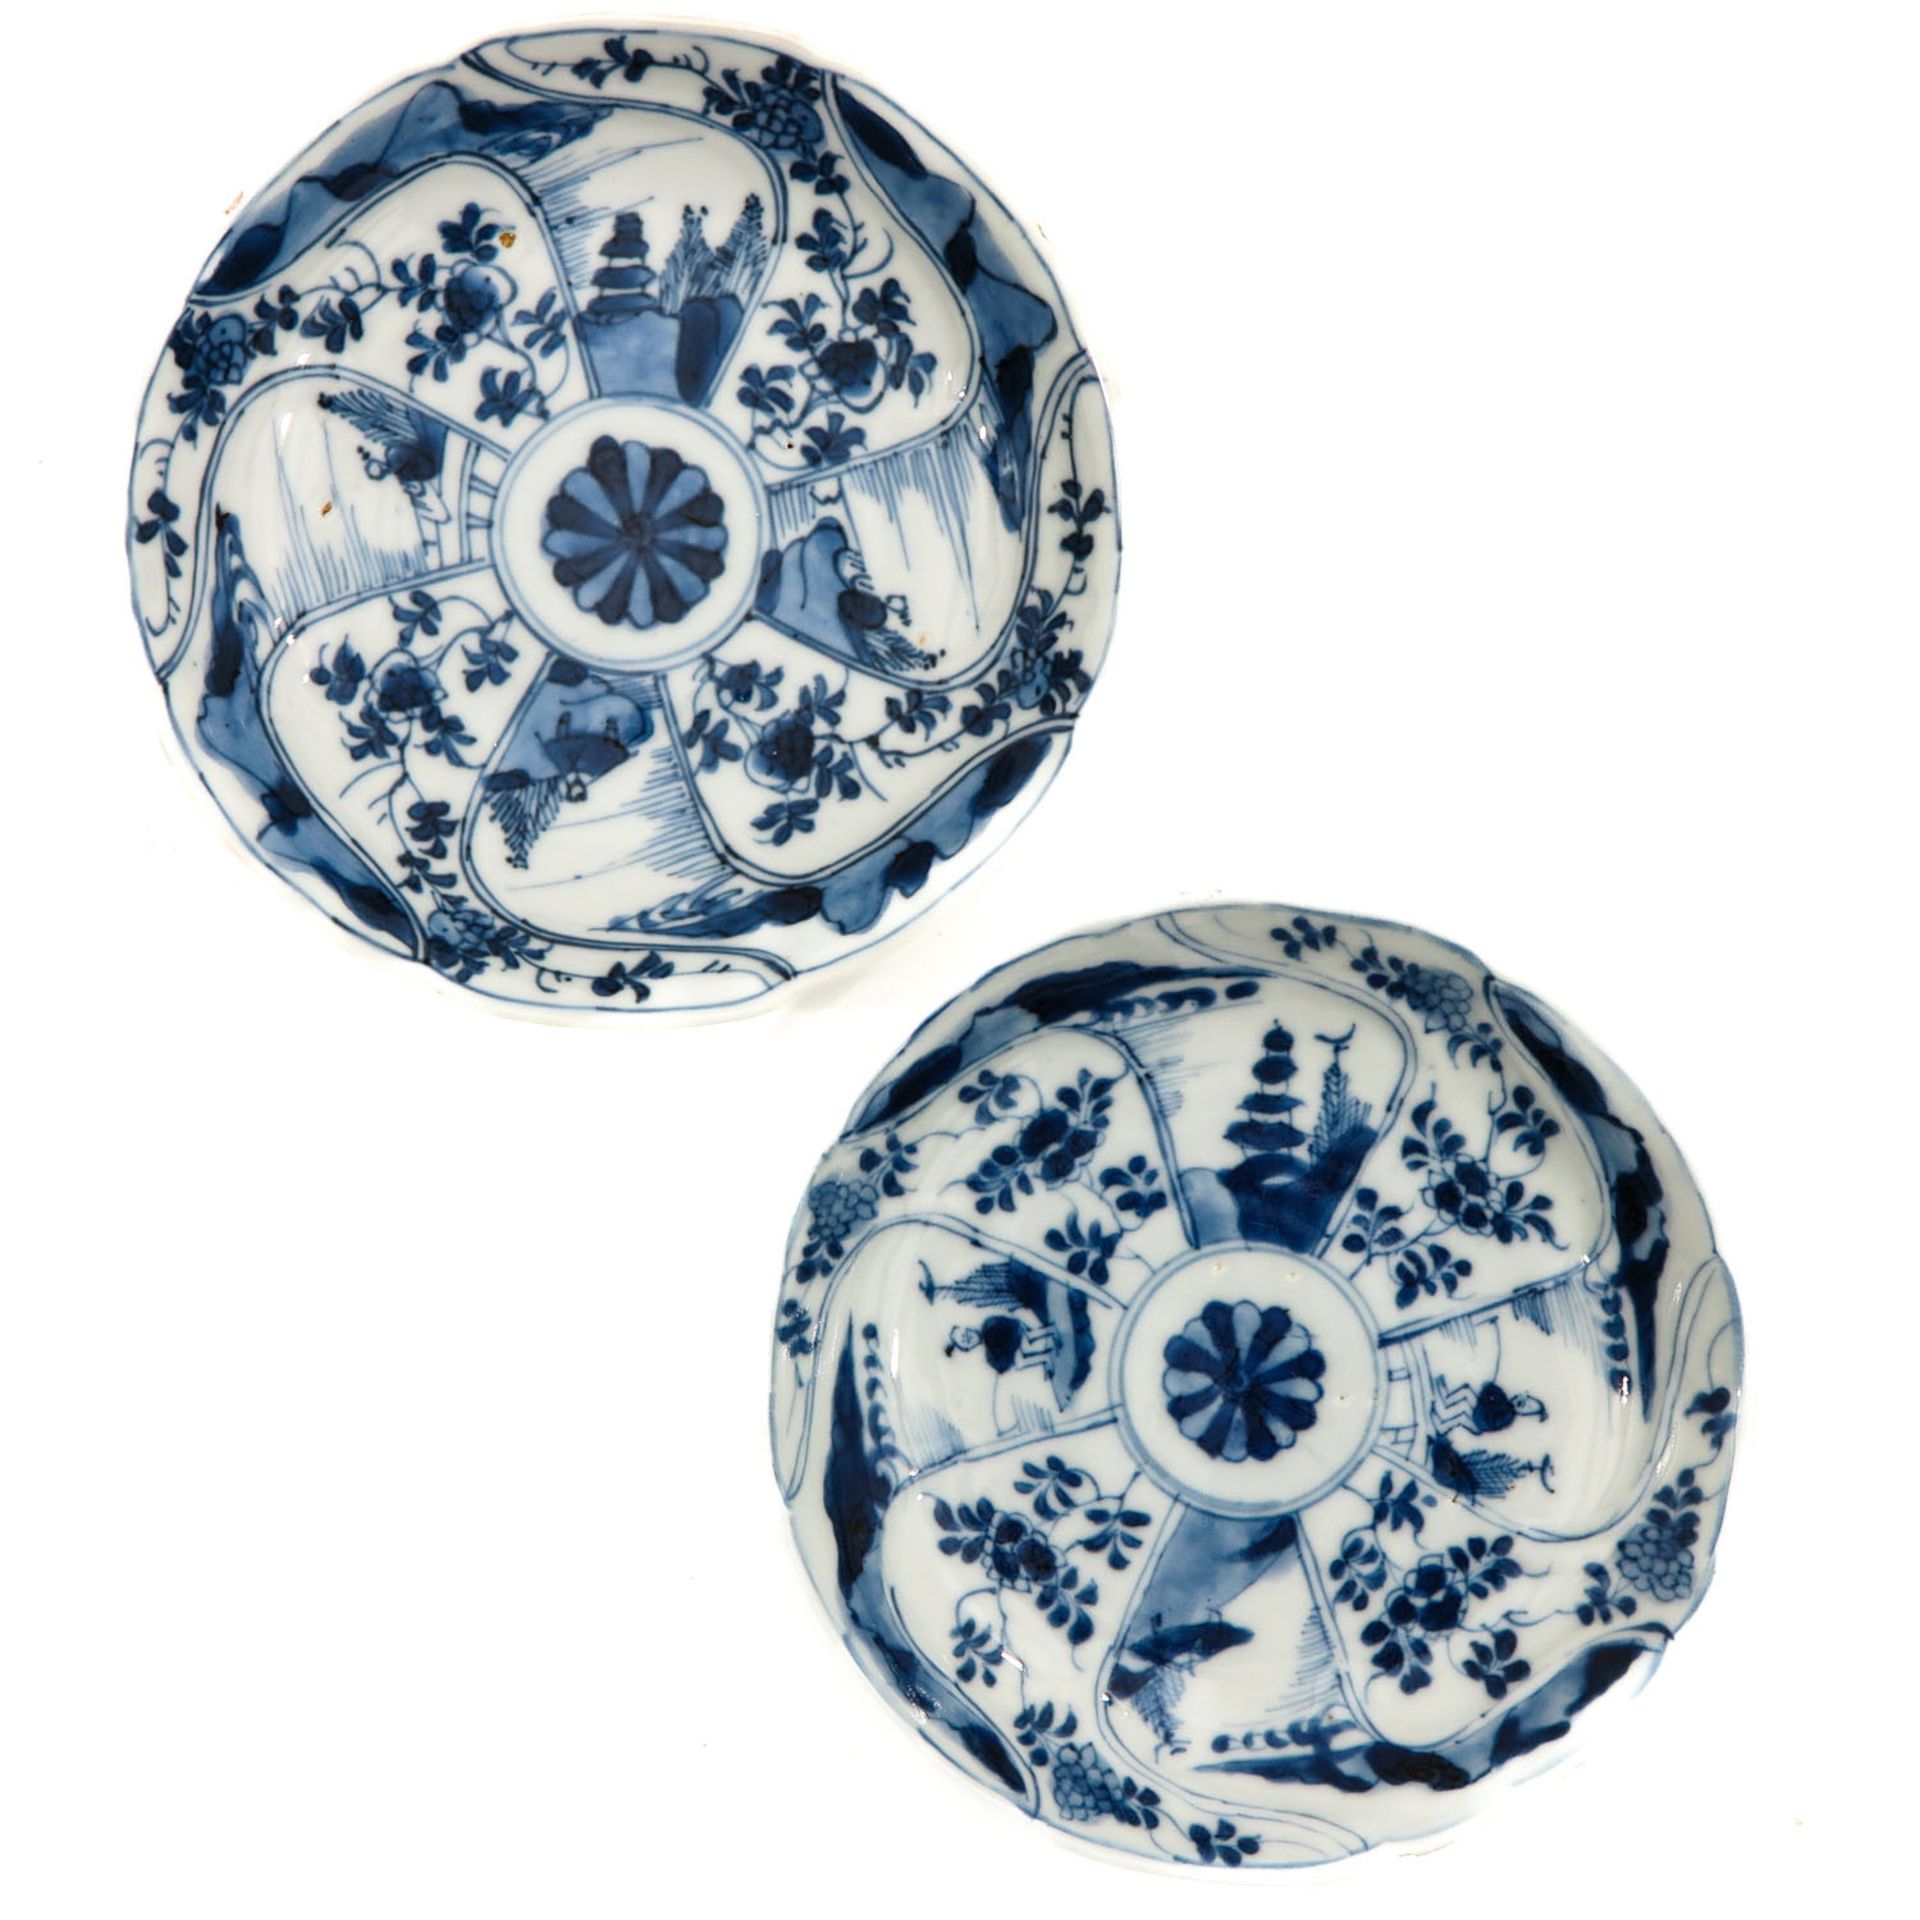 A Series of 6 Blue and White Small Plates - Image 5 of 10